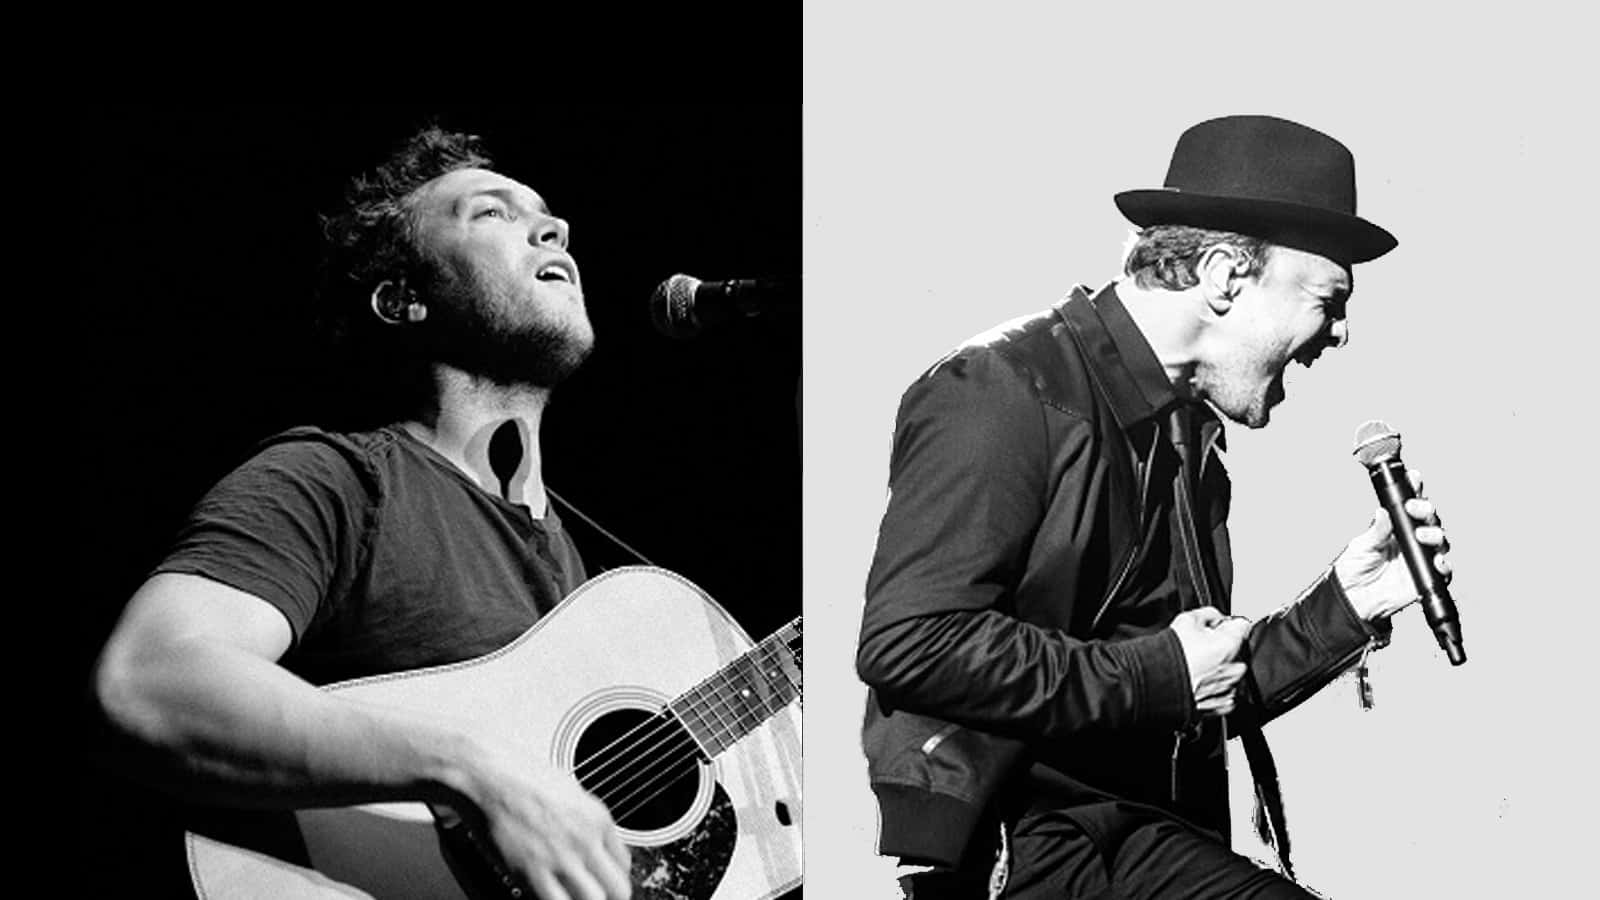 Phillip Phillips and Gavin DeGraw Innsbrook After Hours